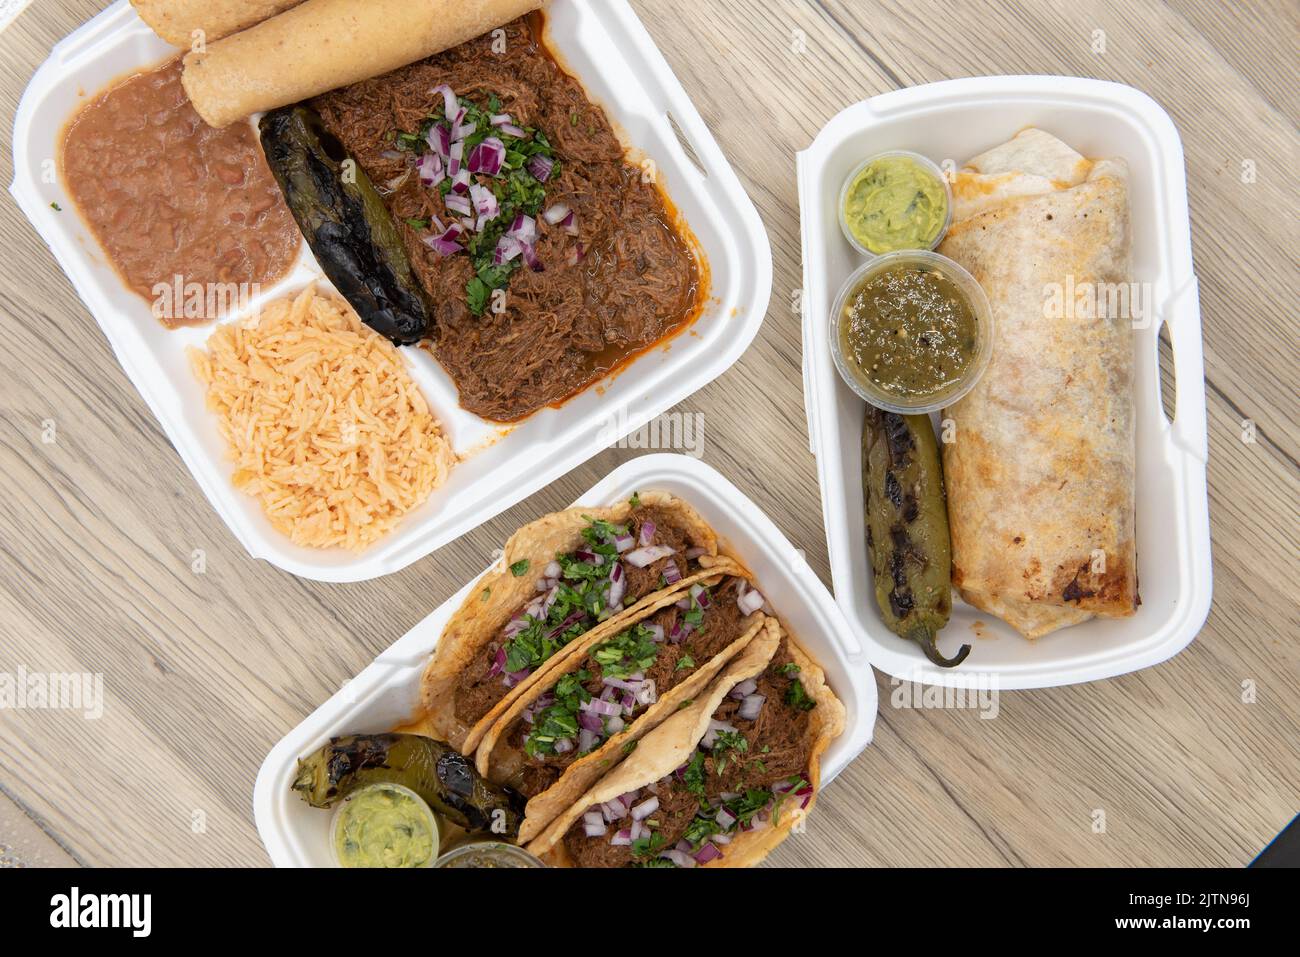 Overhead view of Mexican food feast on the table with choices of burrito, birria stew meat combo, or 3 tacos served with guacamole, salsa, and a grill Stock Photo